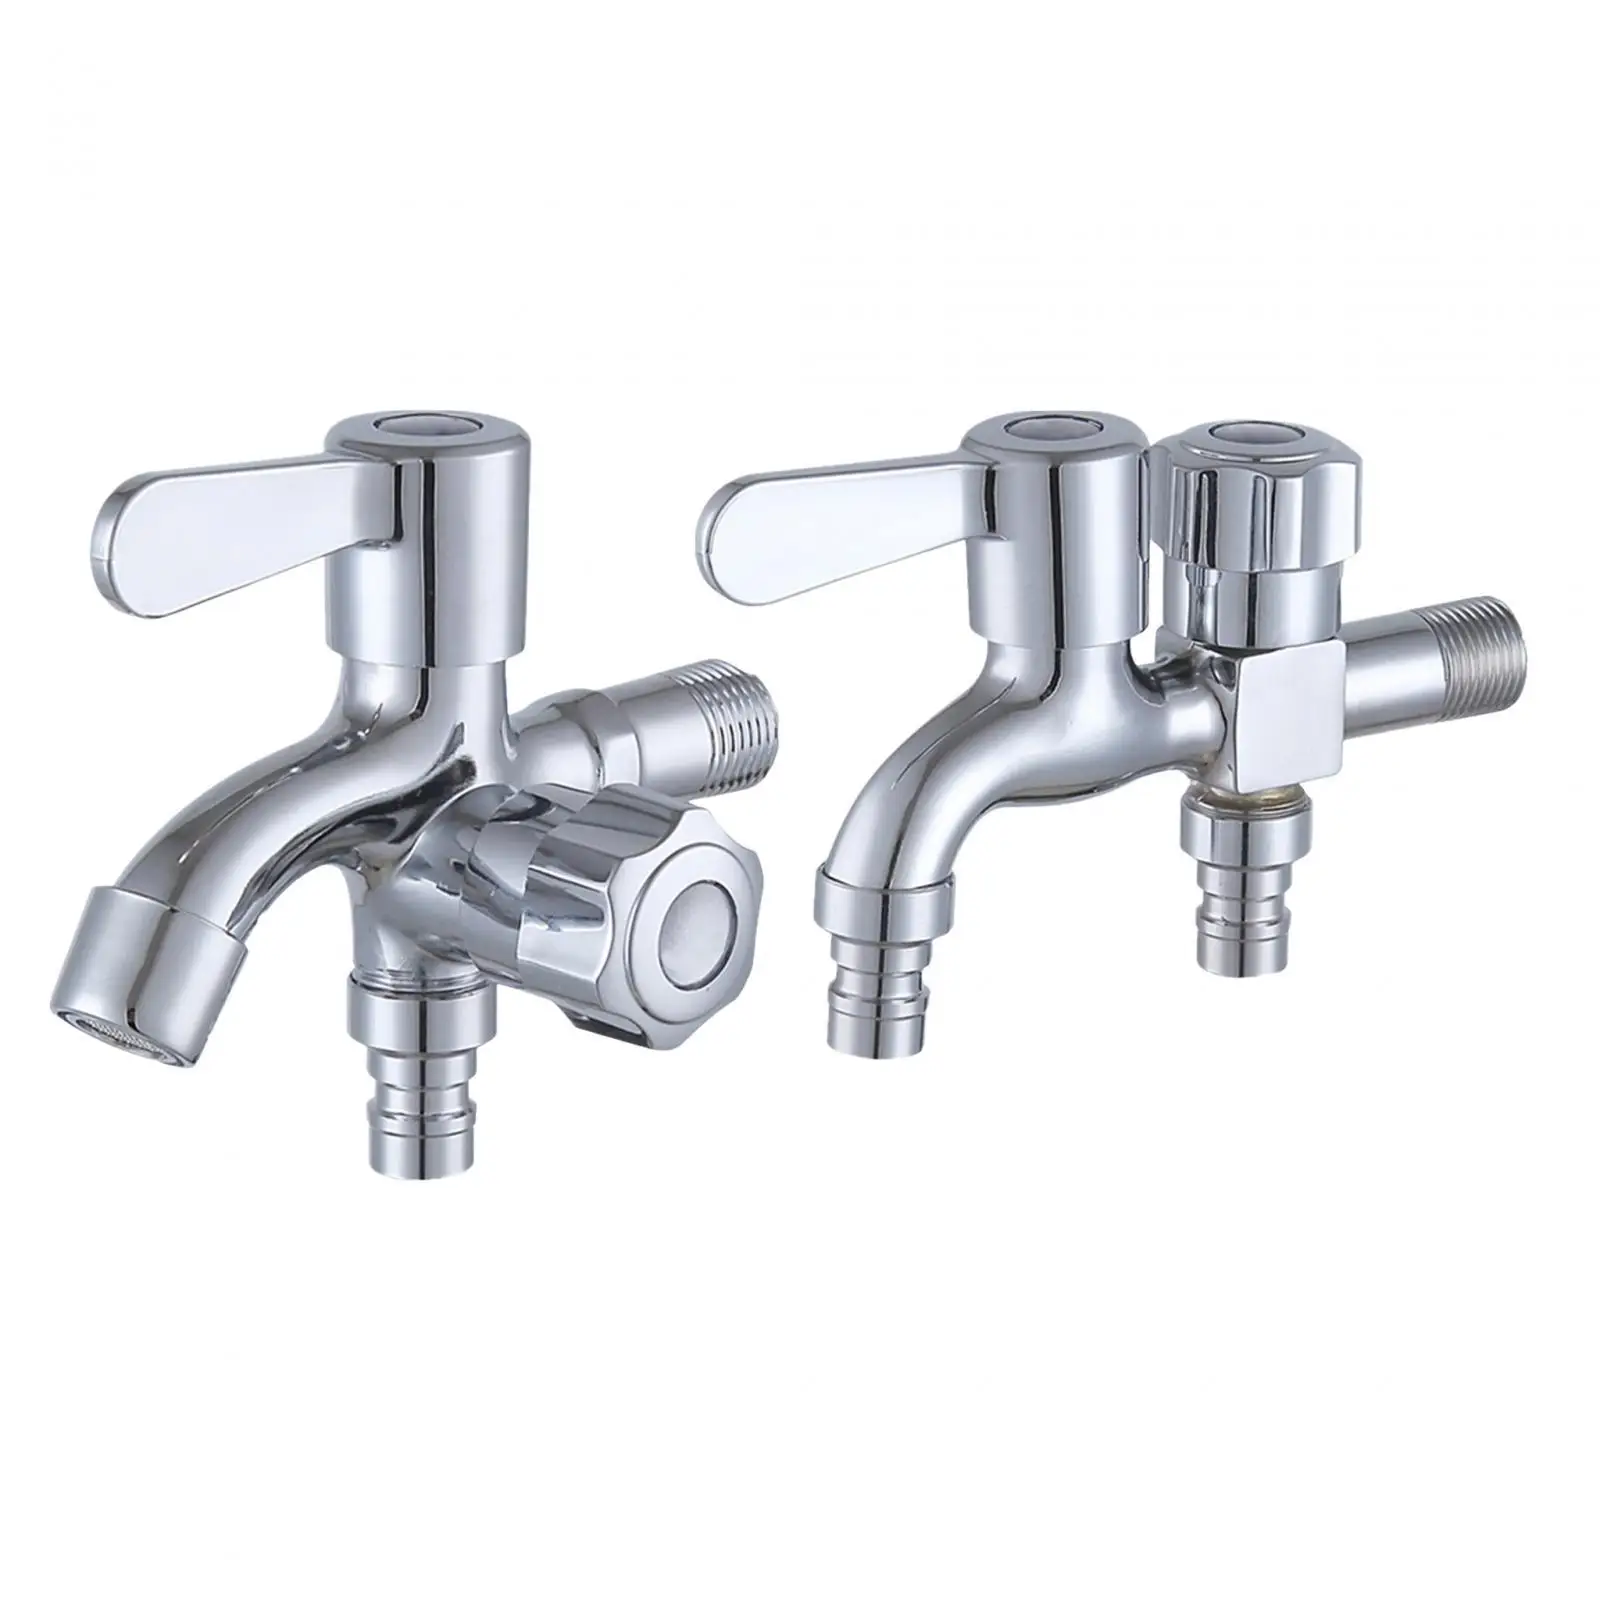 Washing Machine Water Faucet Wal Mounted Alloy Mop Pool Faucet Double Outlet